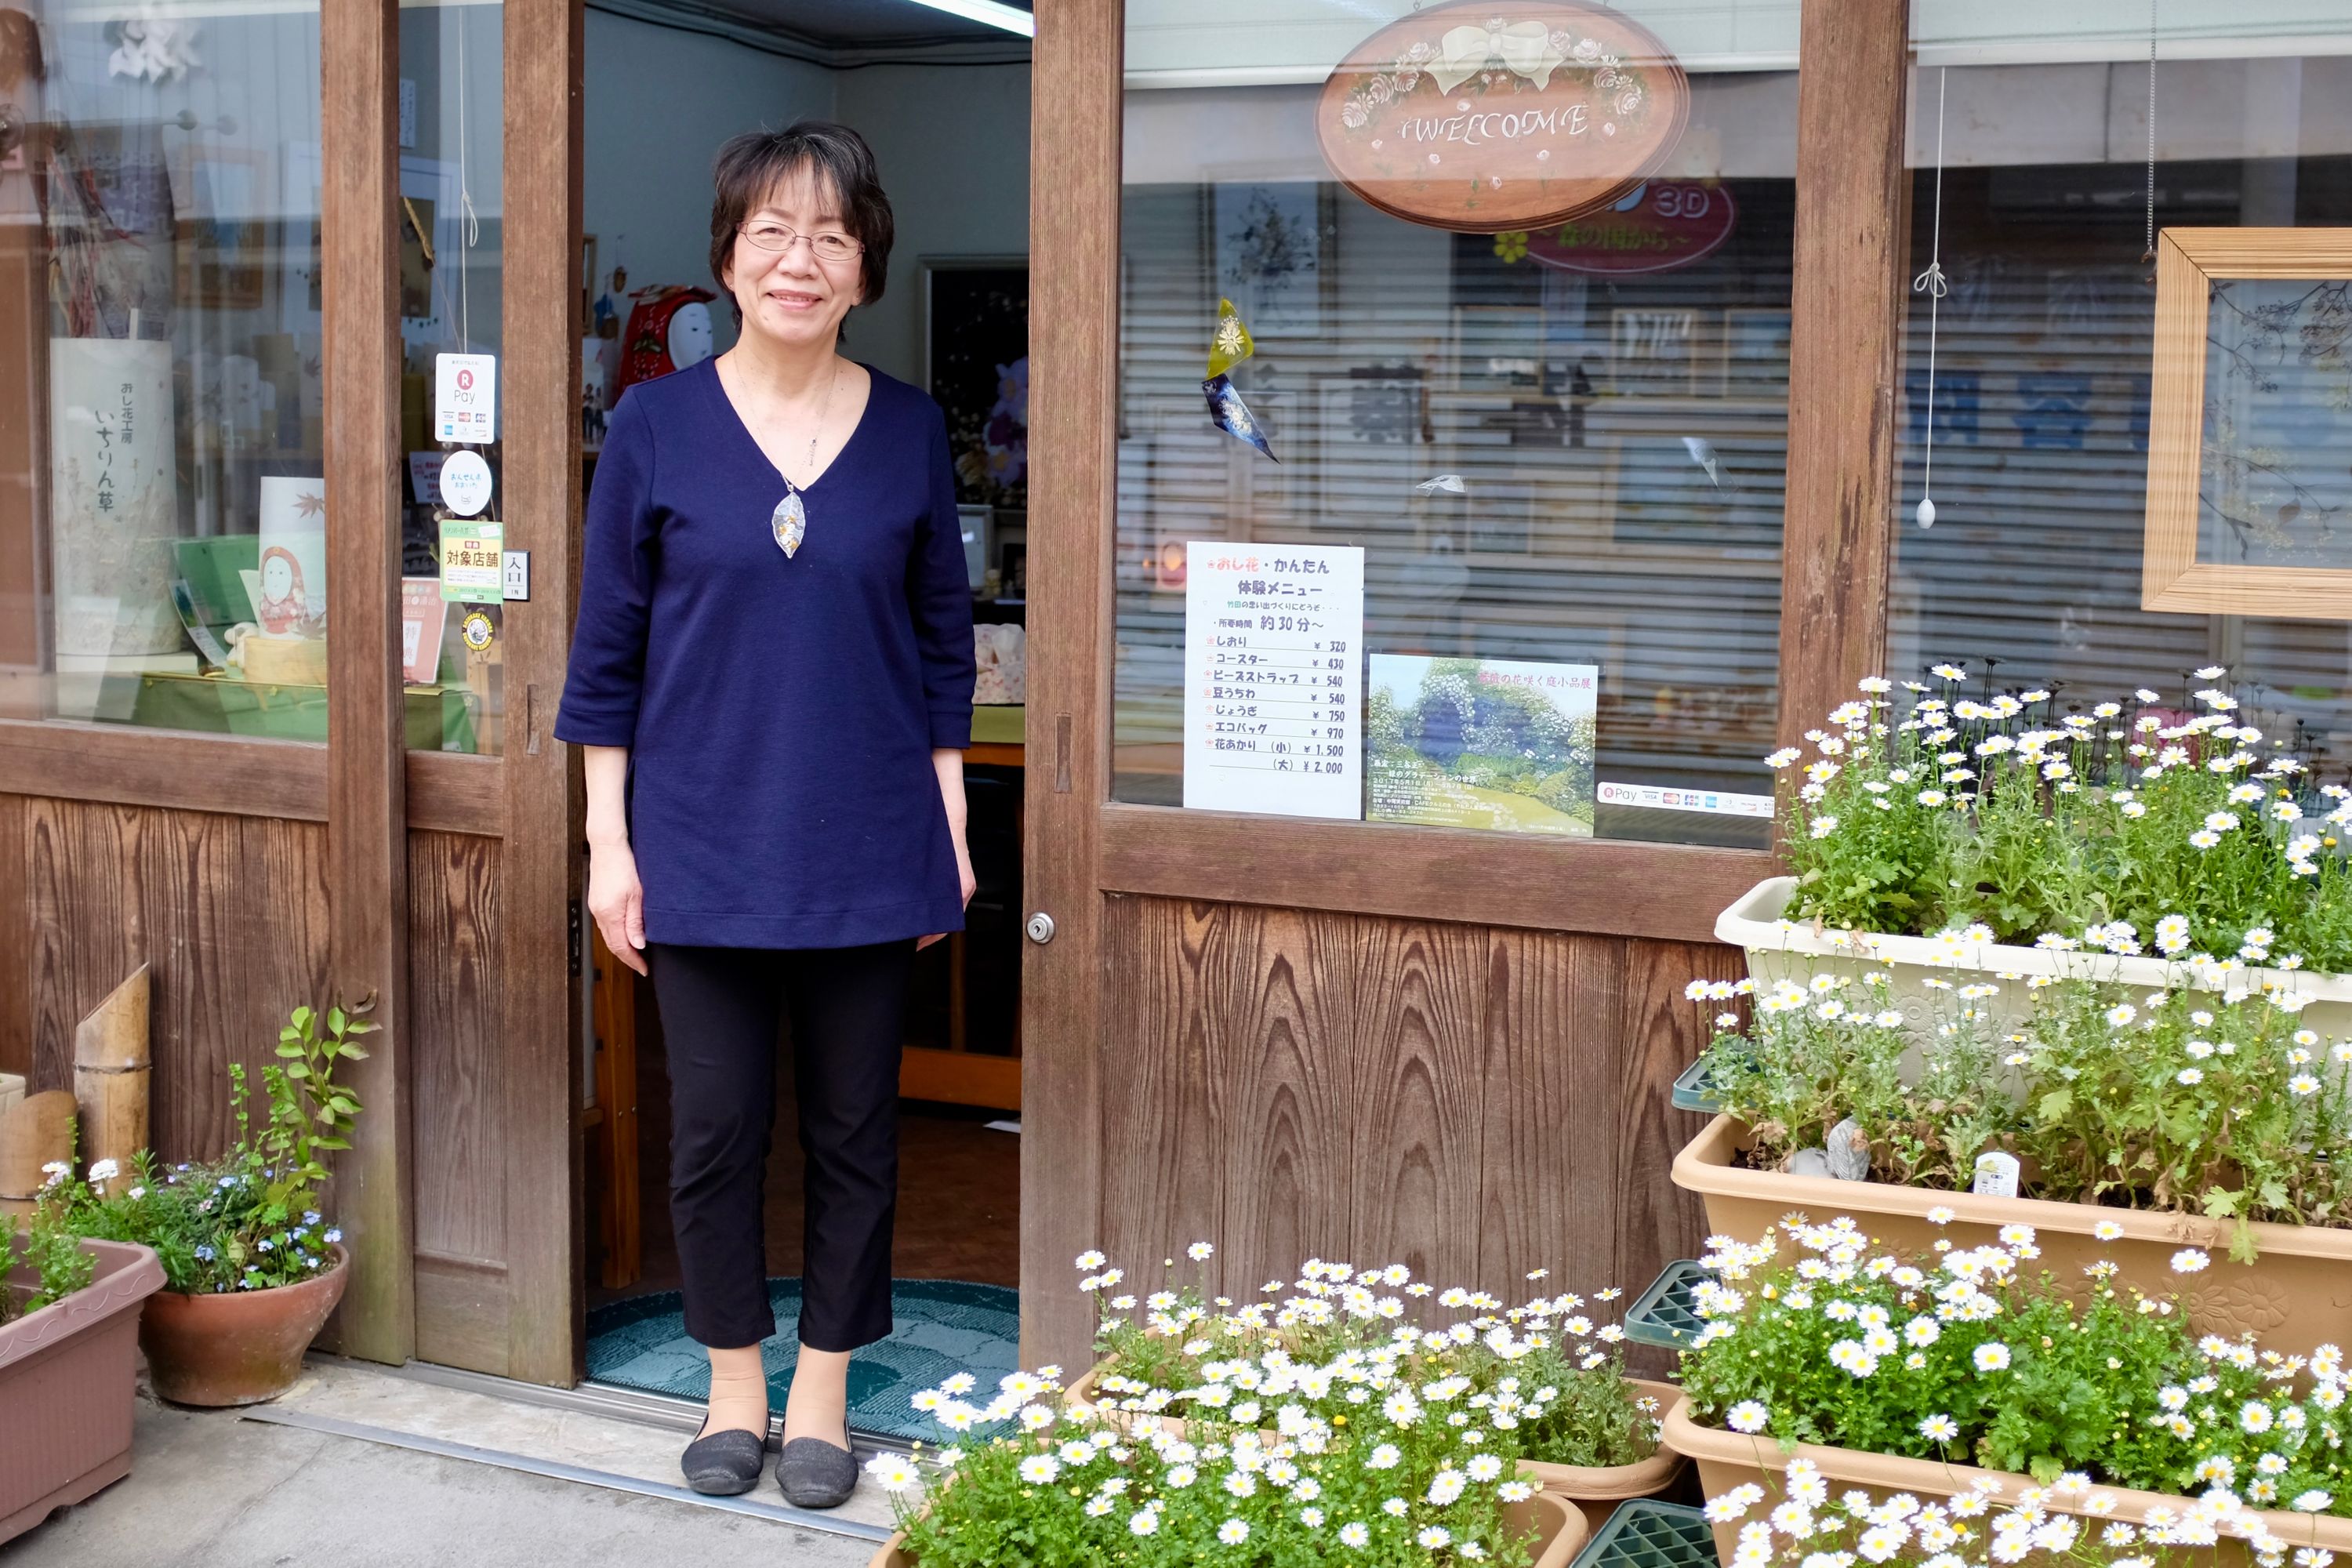 A middle-aged Japanese woman in glasses stands in the doorway of her shop, with many pots of live flowers outside.